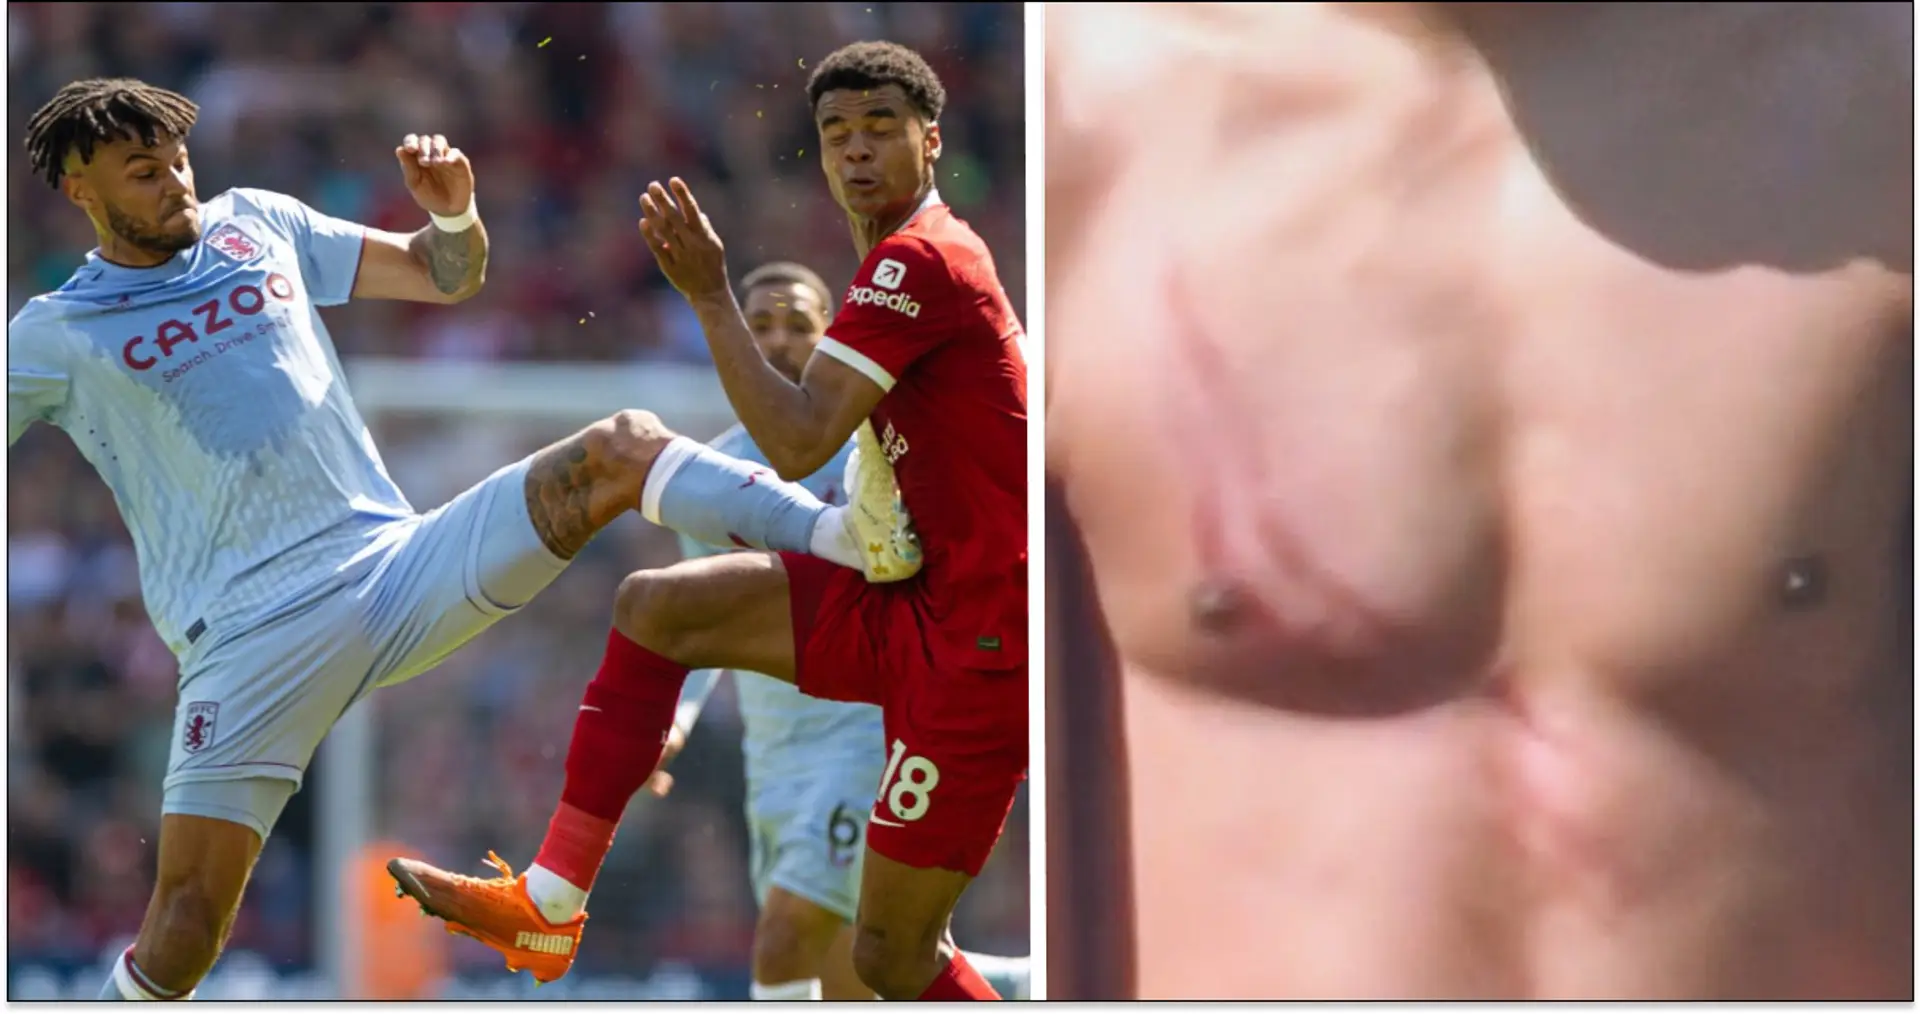 Spotted: Stud marks on Gakpo's body after Mings brutal high-boot challenge